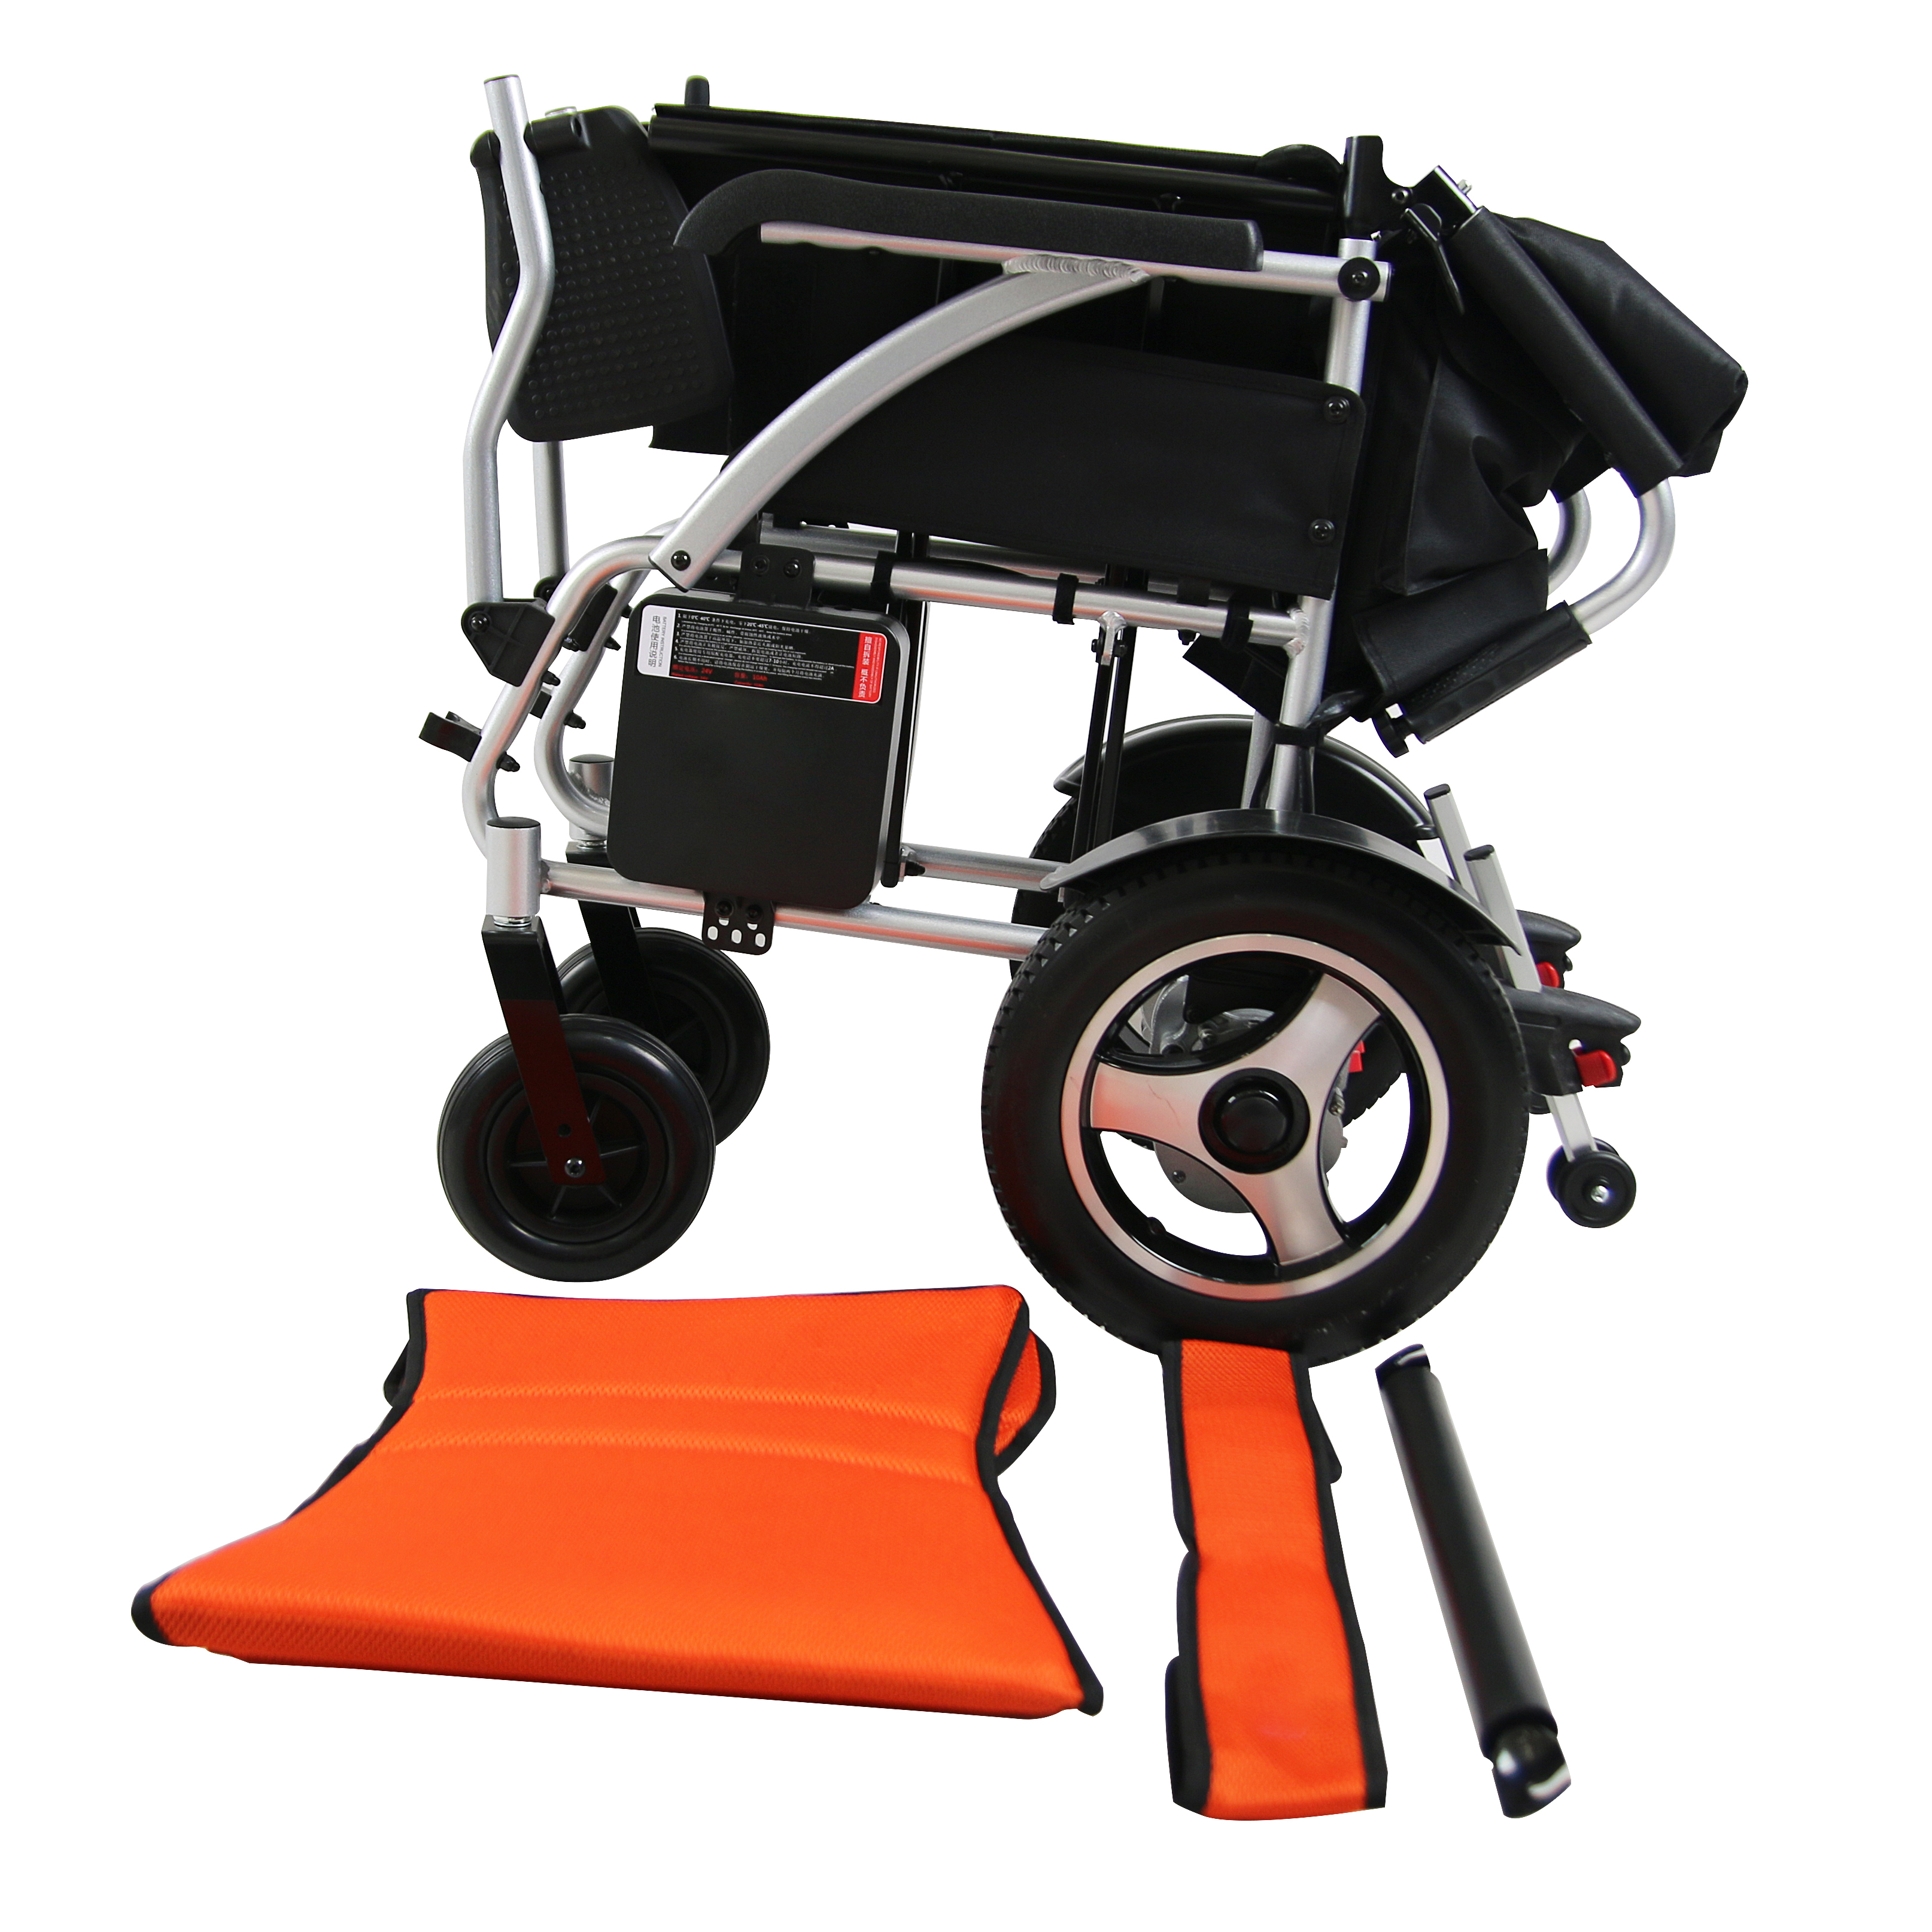 factory customizable wheelchair price list training foldable power wheelchair for disabled